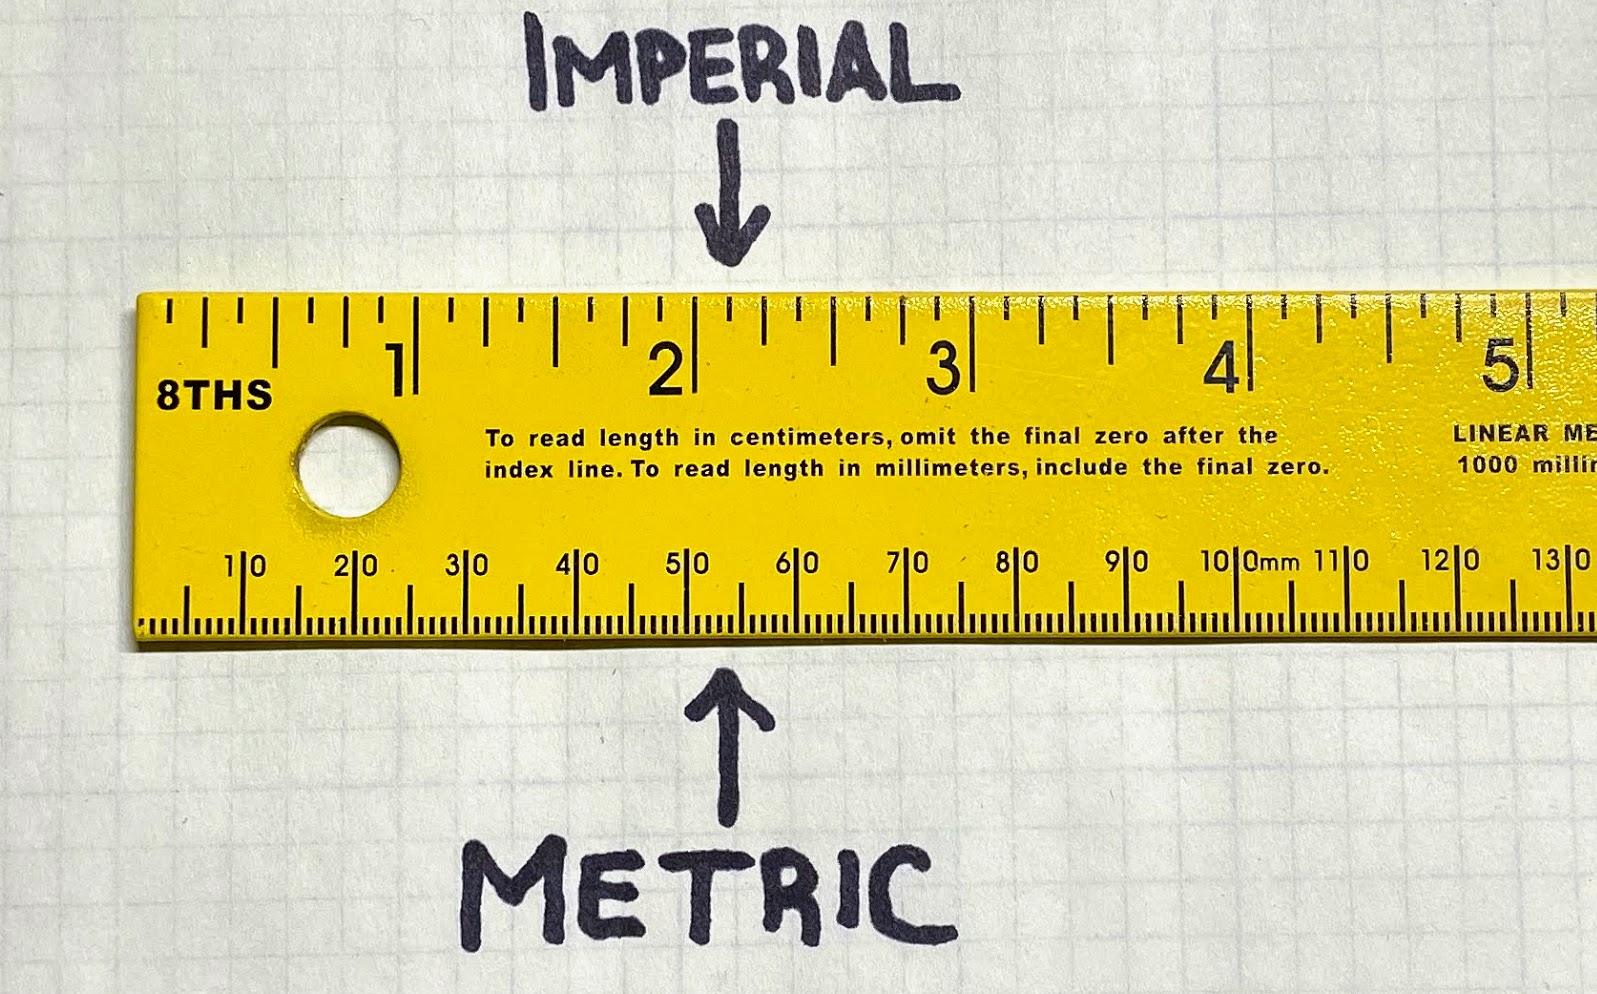 Imperial and Metric